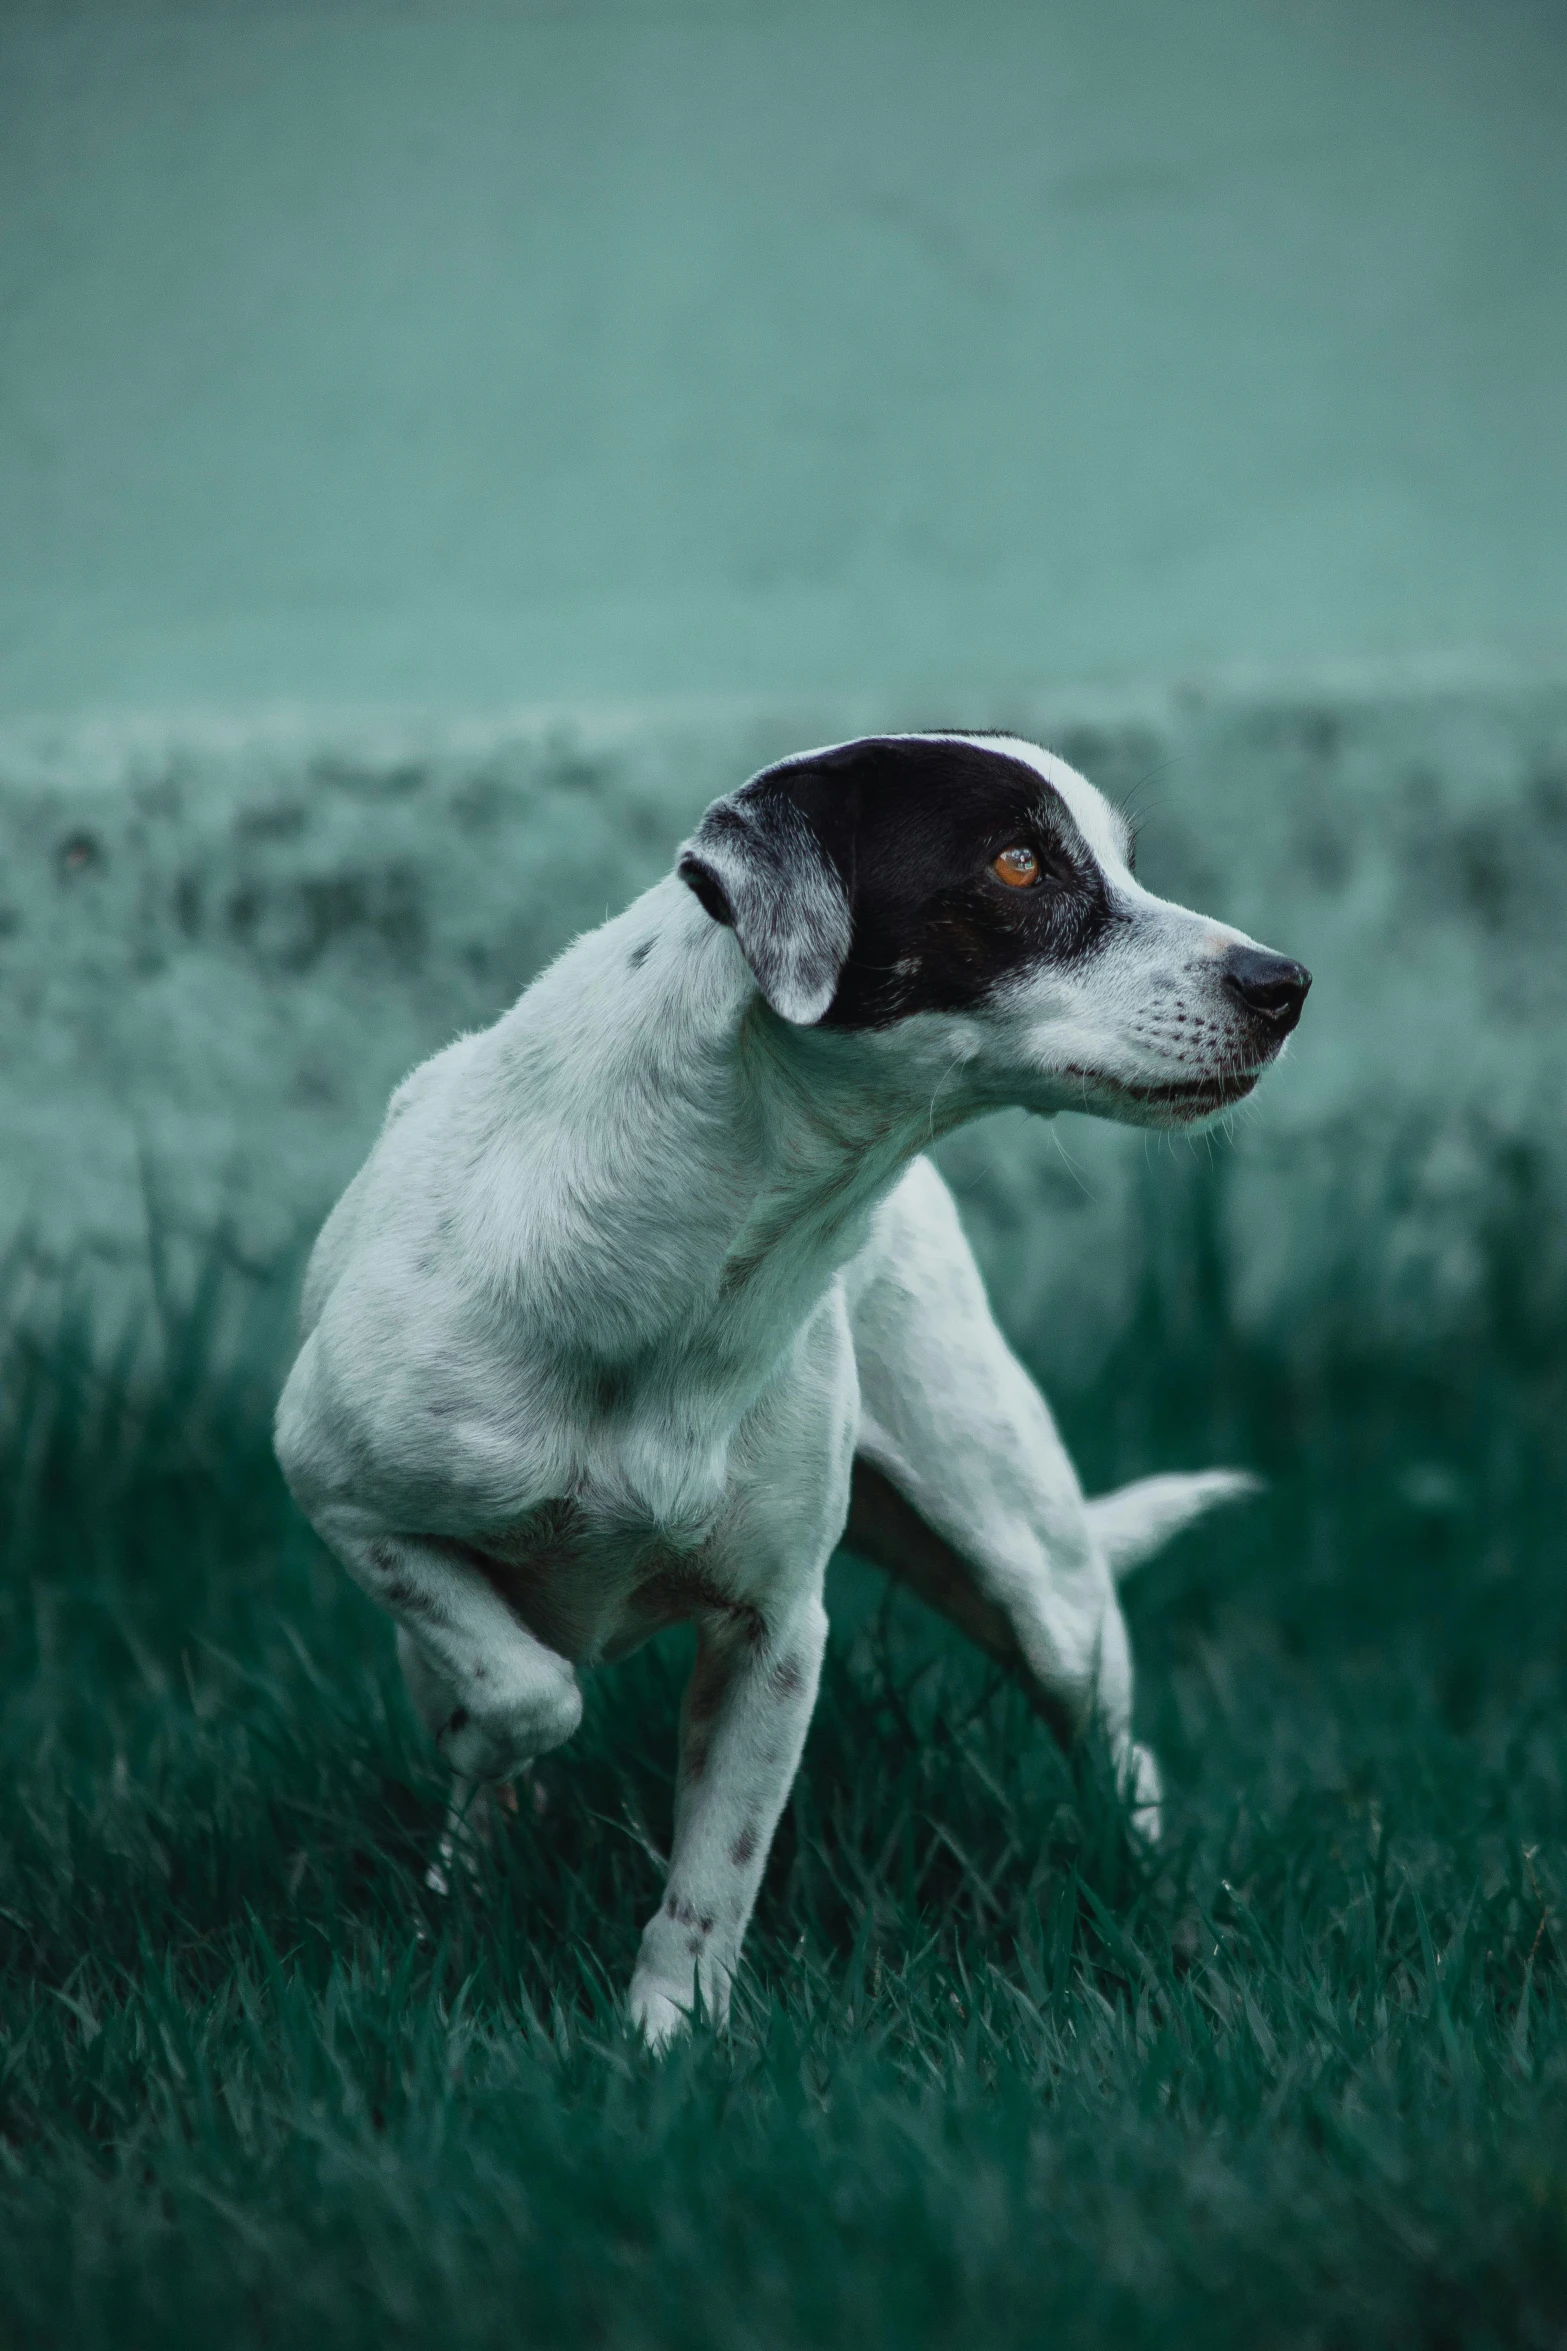 a dog running across a lush green field, inspired by Elke Vogelsang, pexels contest winner, renaissance, white with black spots, evening time, blank, mixed animal